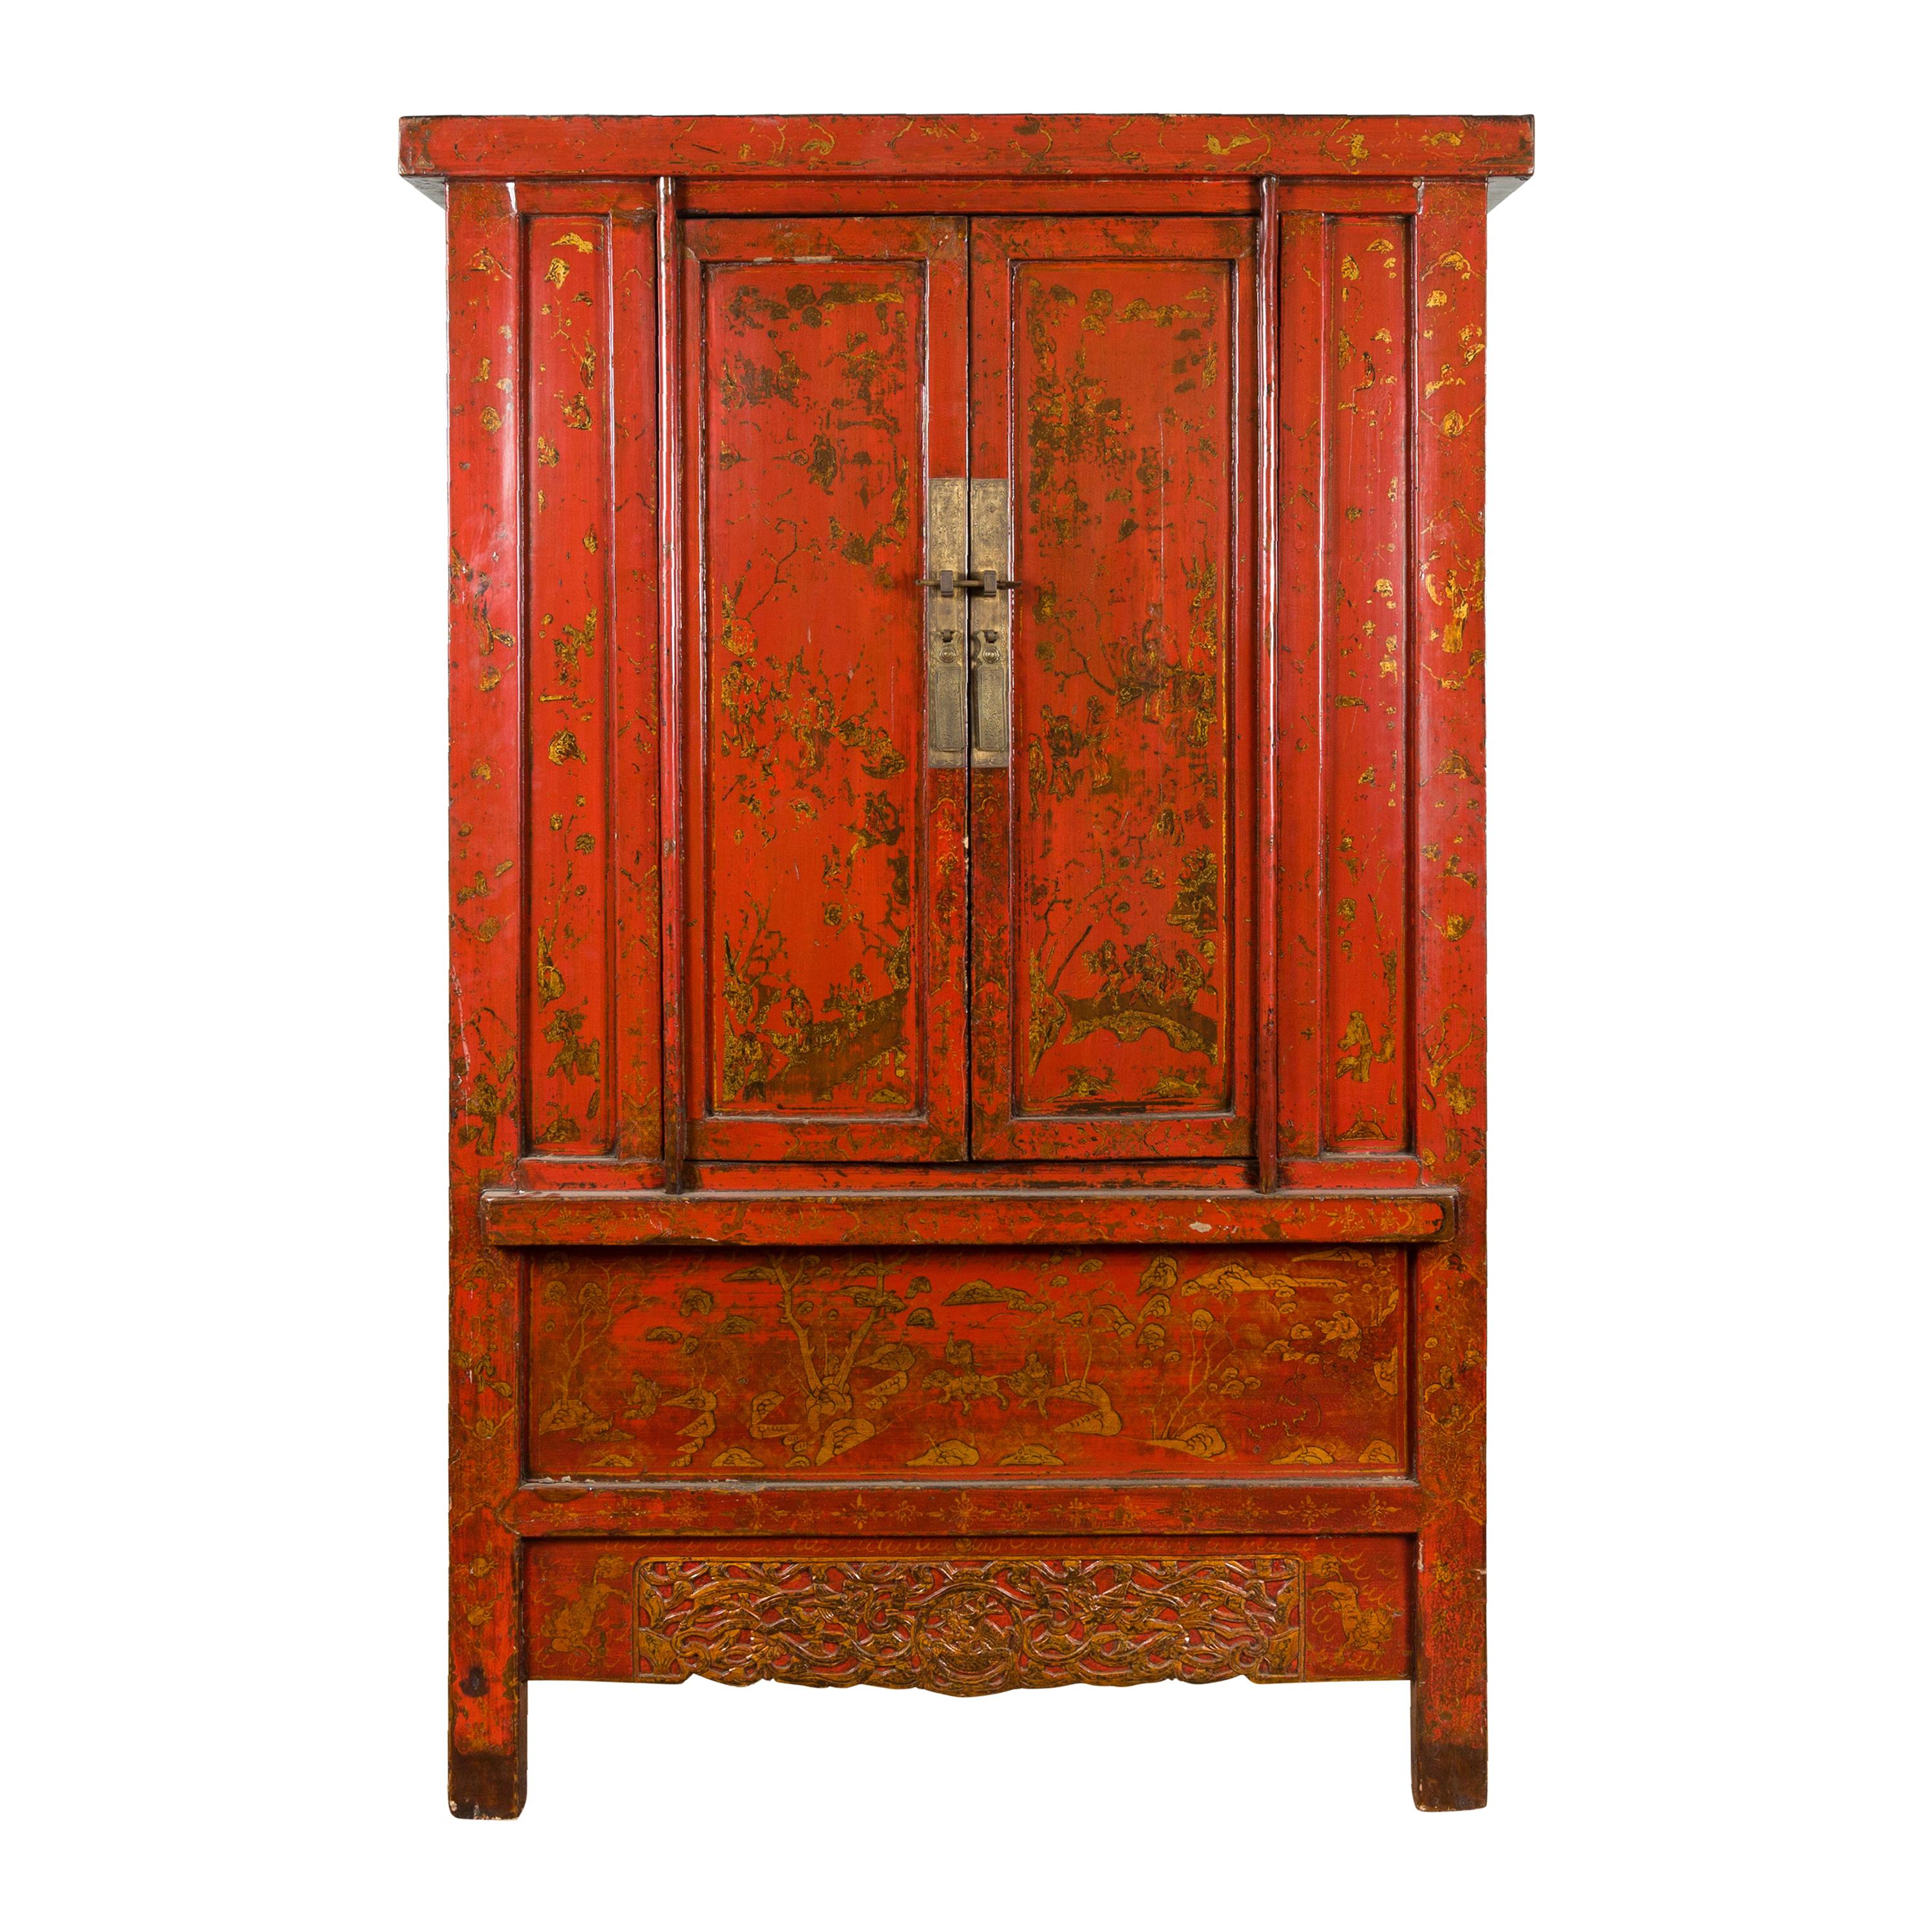 Chinese Qing Dynasty Period Red Lacquered Cabinet with Gilt Chinoiserie Décor